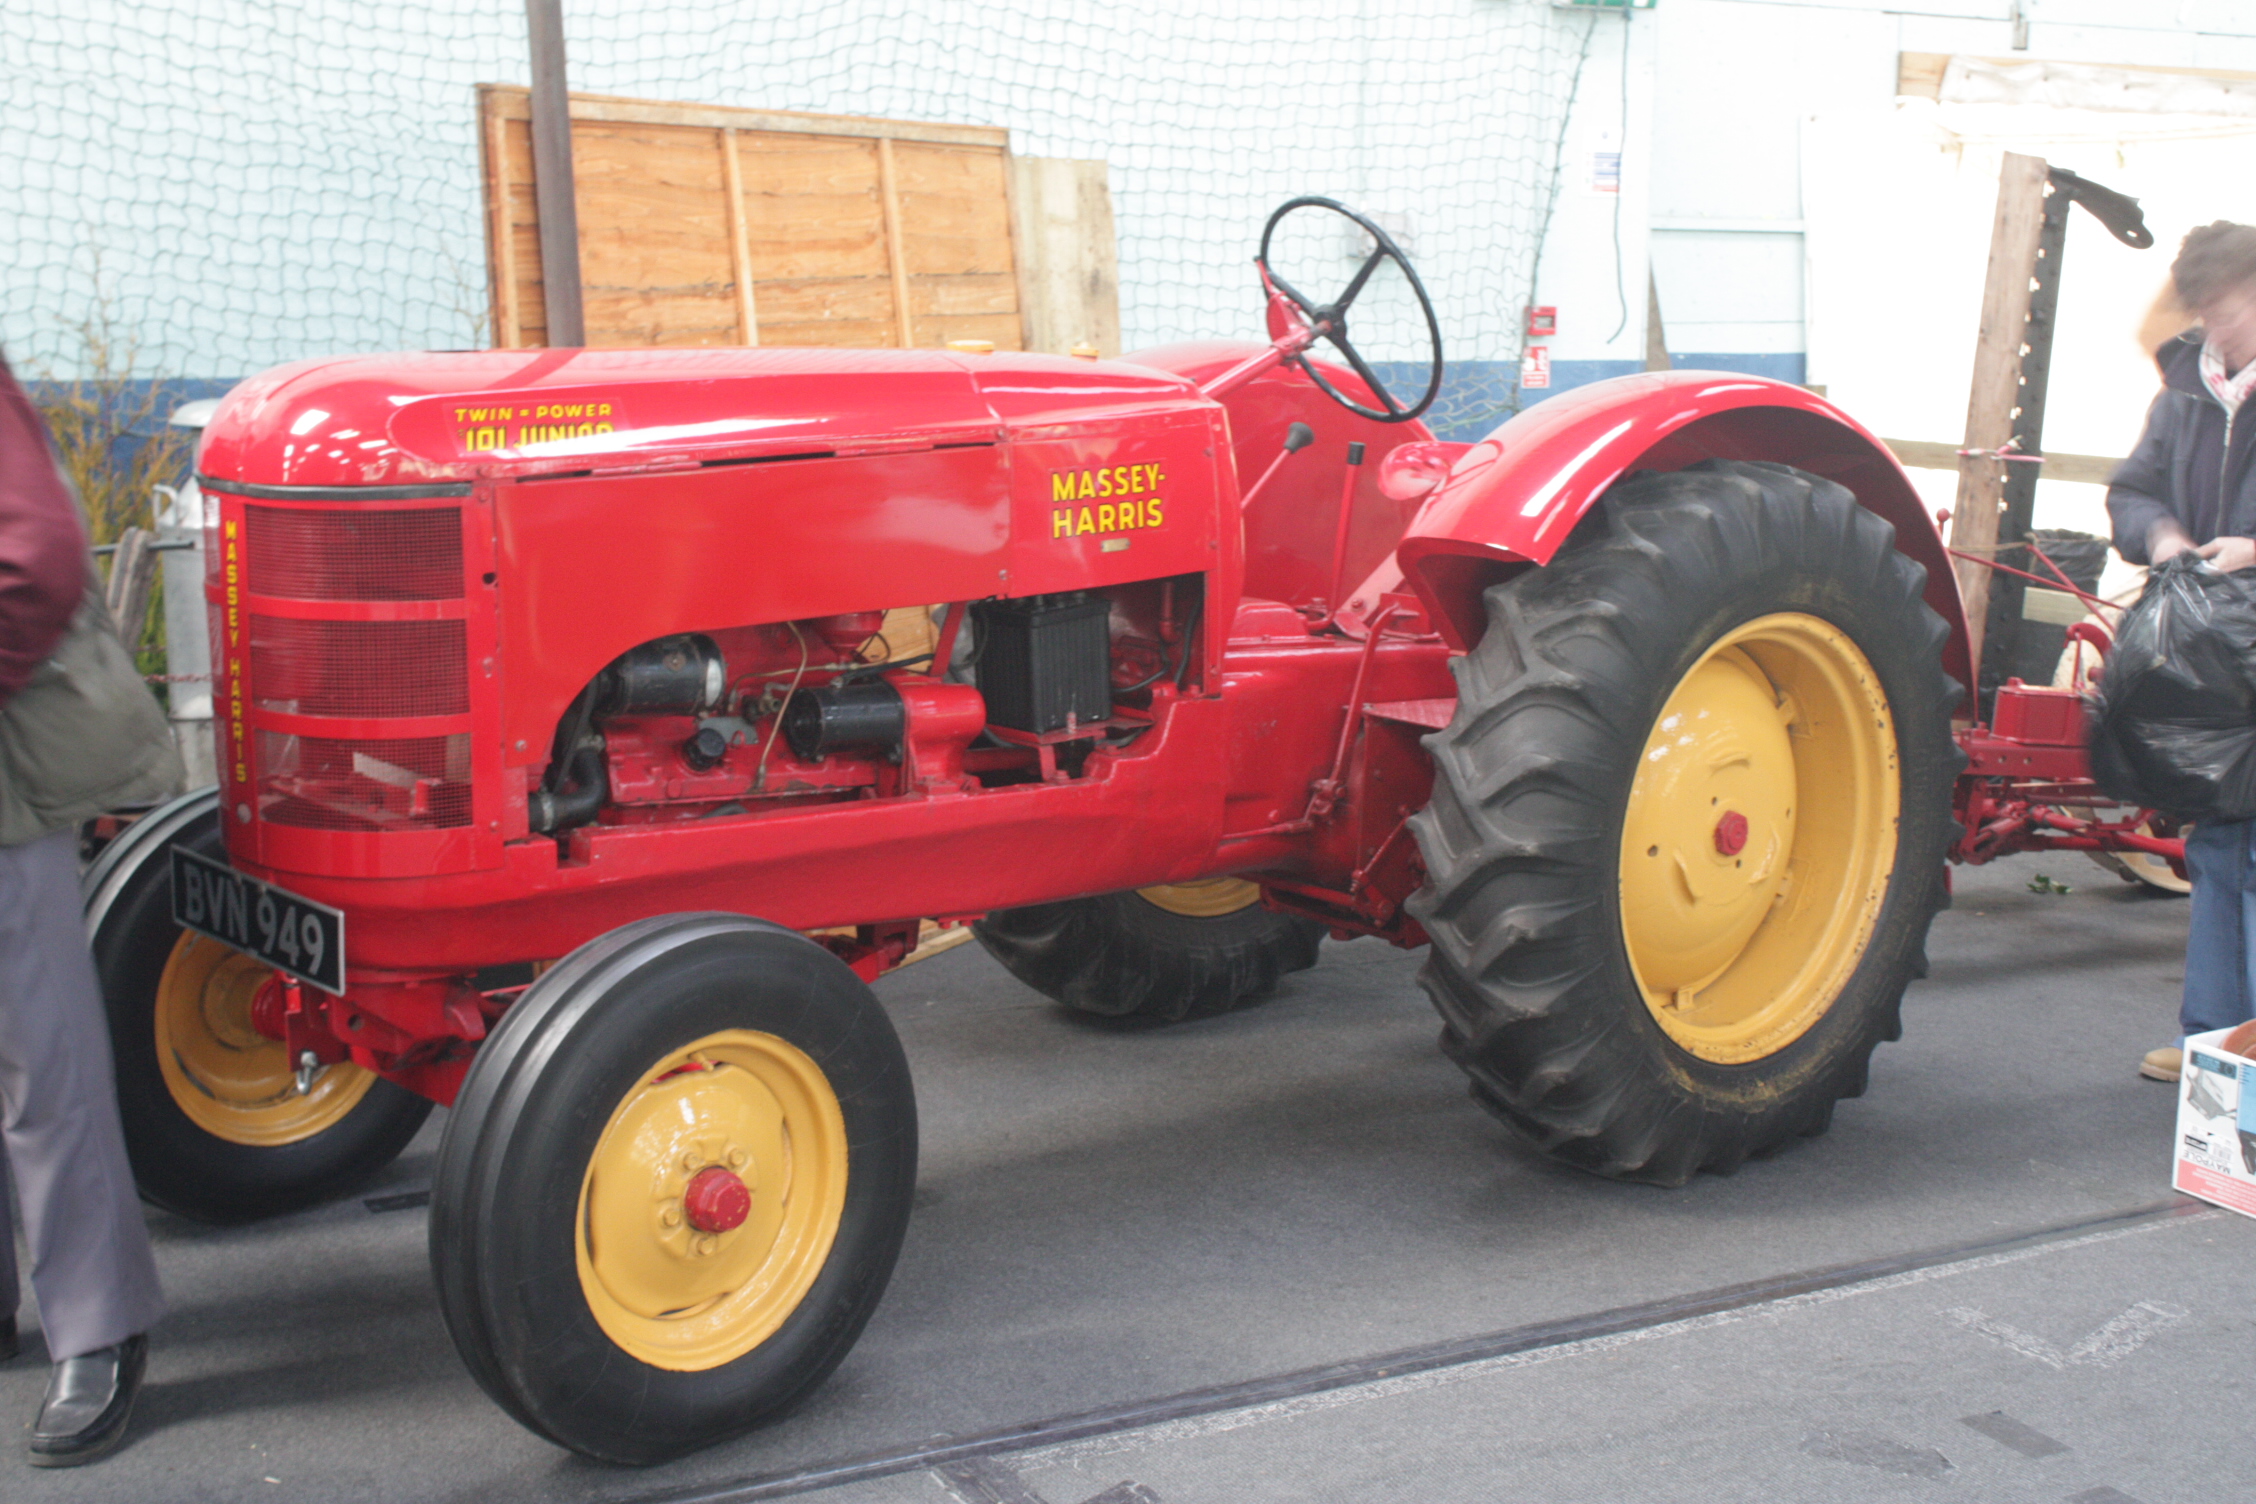 Massey-harris 20. Amazing pictures & video to Massey-harris 20. | Cars ...